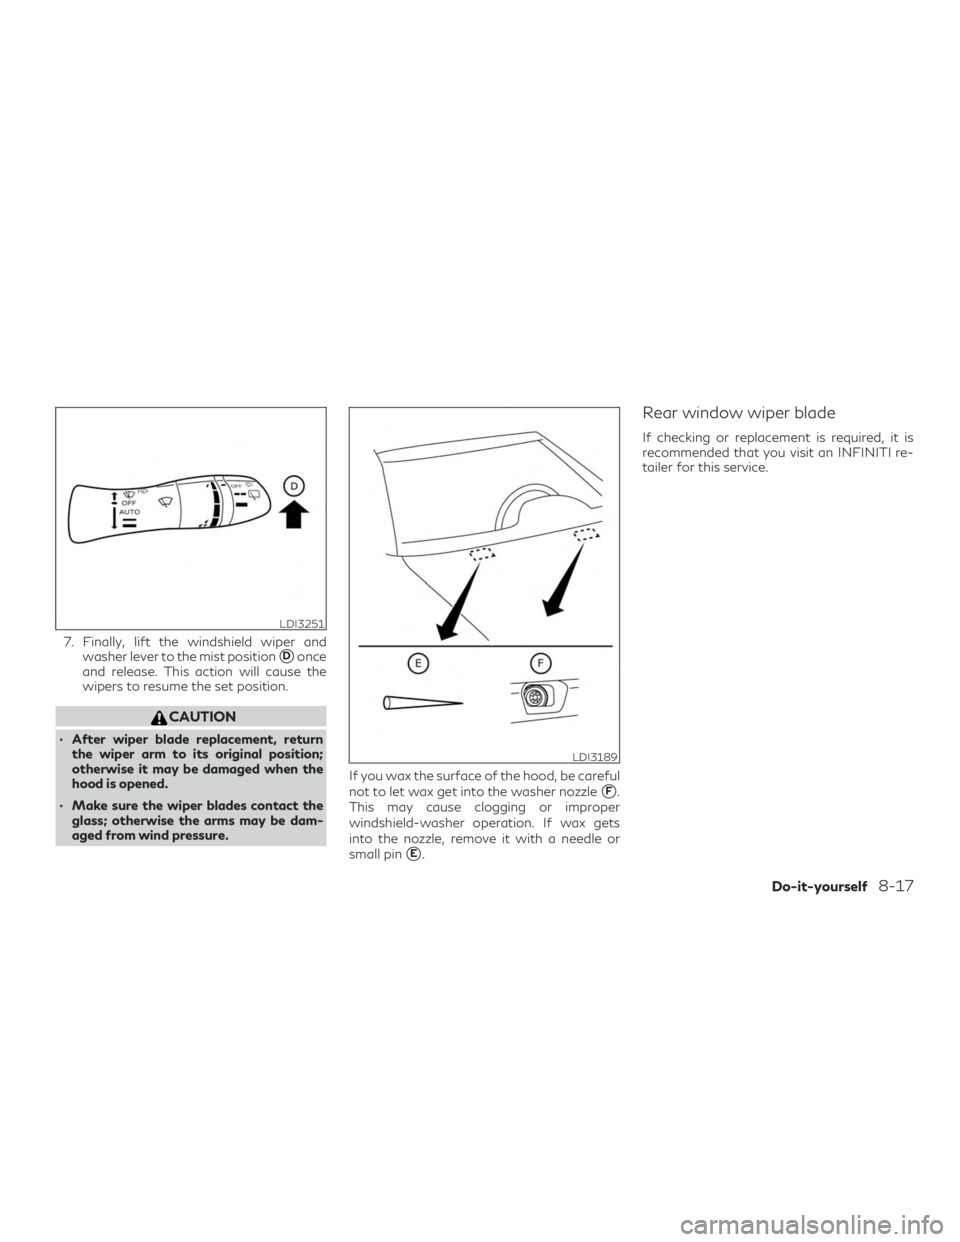 INFINITI QX50 2020  Owners Manual 7. Finally, lift the windshield wiper andwasher lever to the mist position
Donce
and release. This action will cause the
wipers to resume the set position.
CAUTION
∙ After wiper blade replacement, 